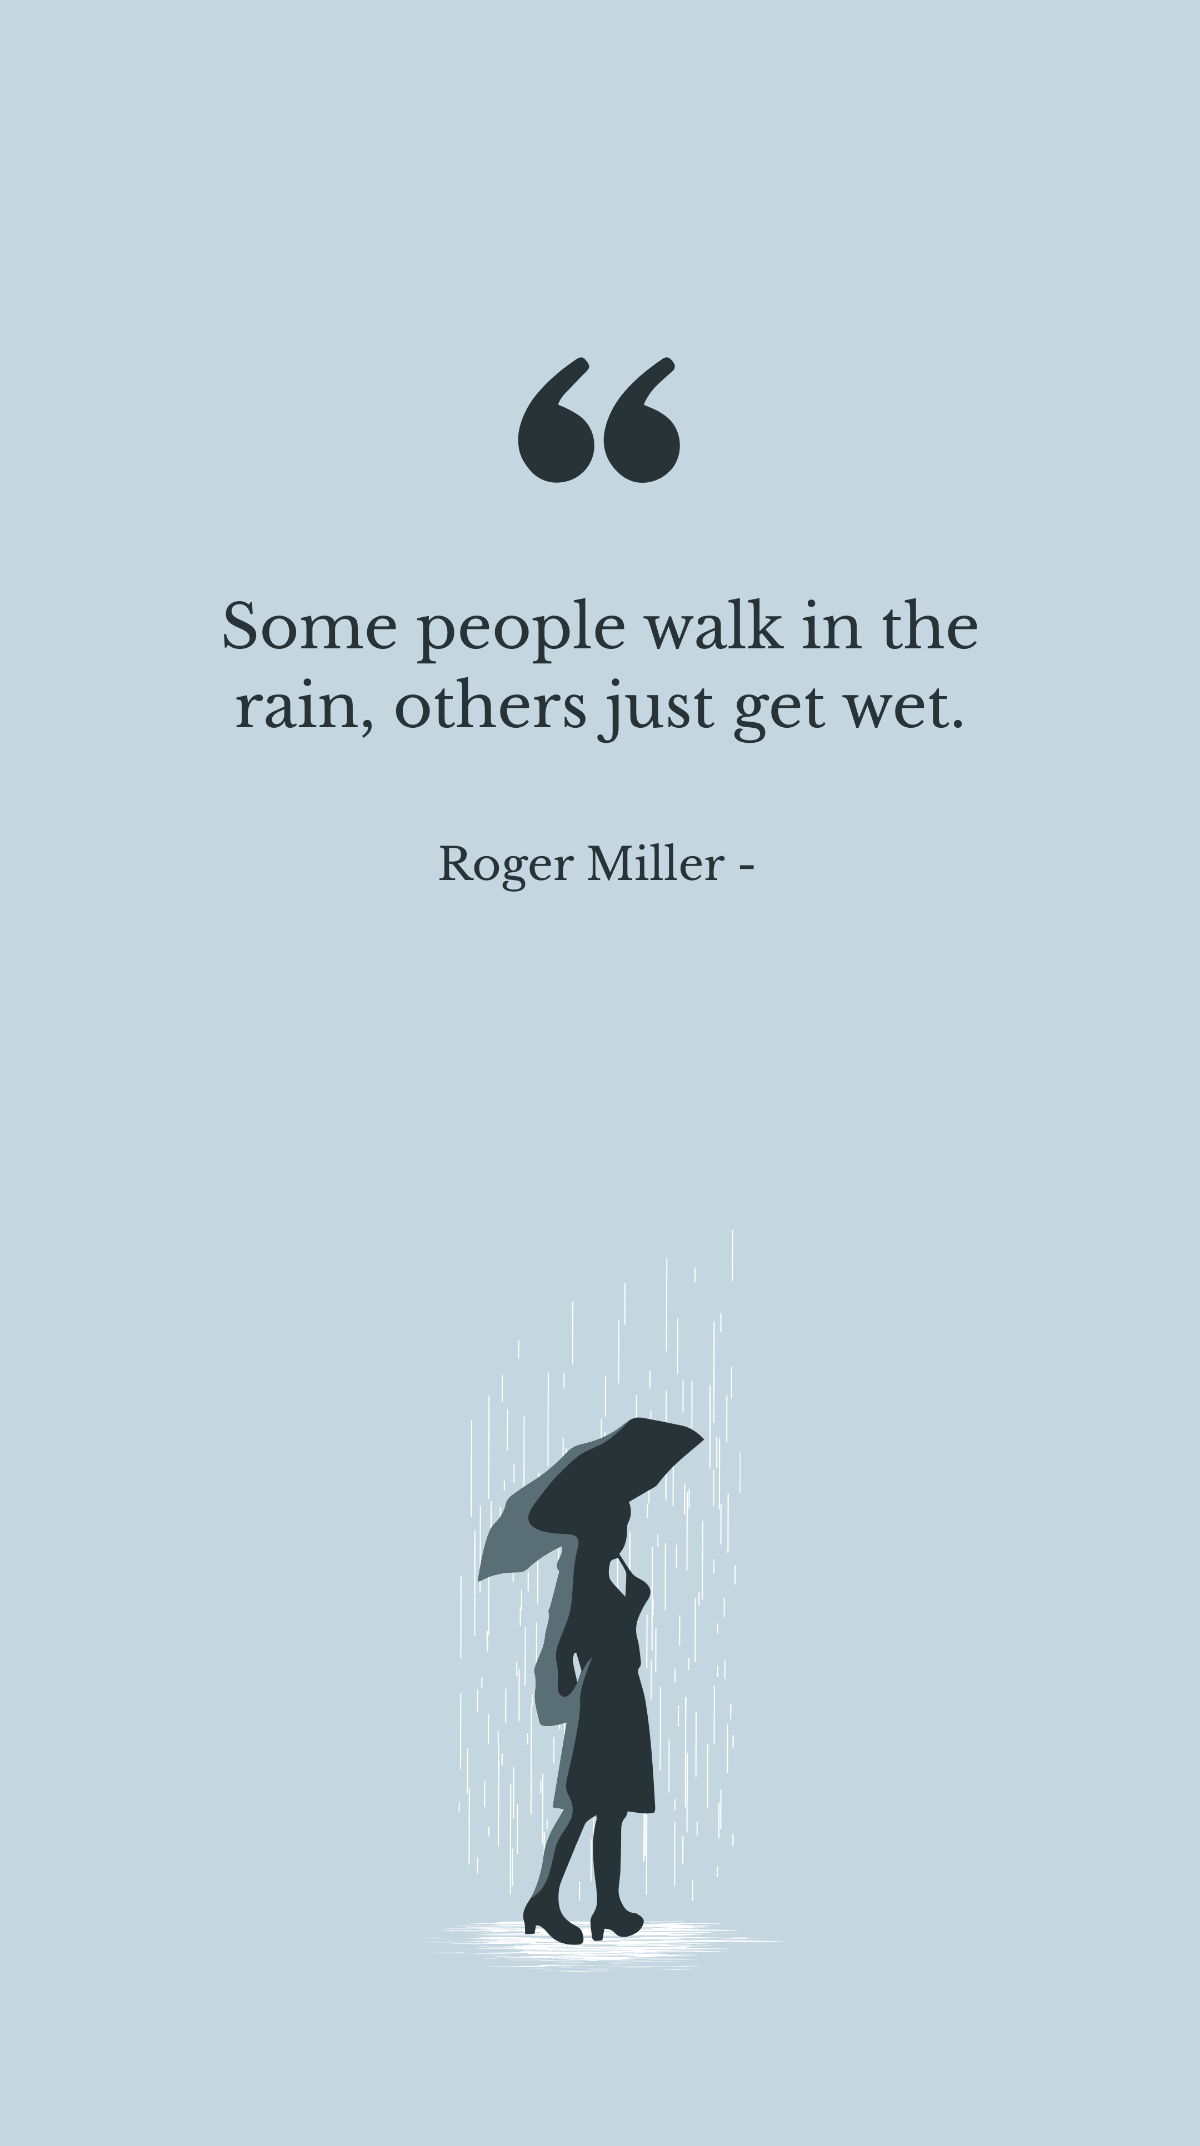 Roger Miller - Some people walk in the rain, others just get wet. Template